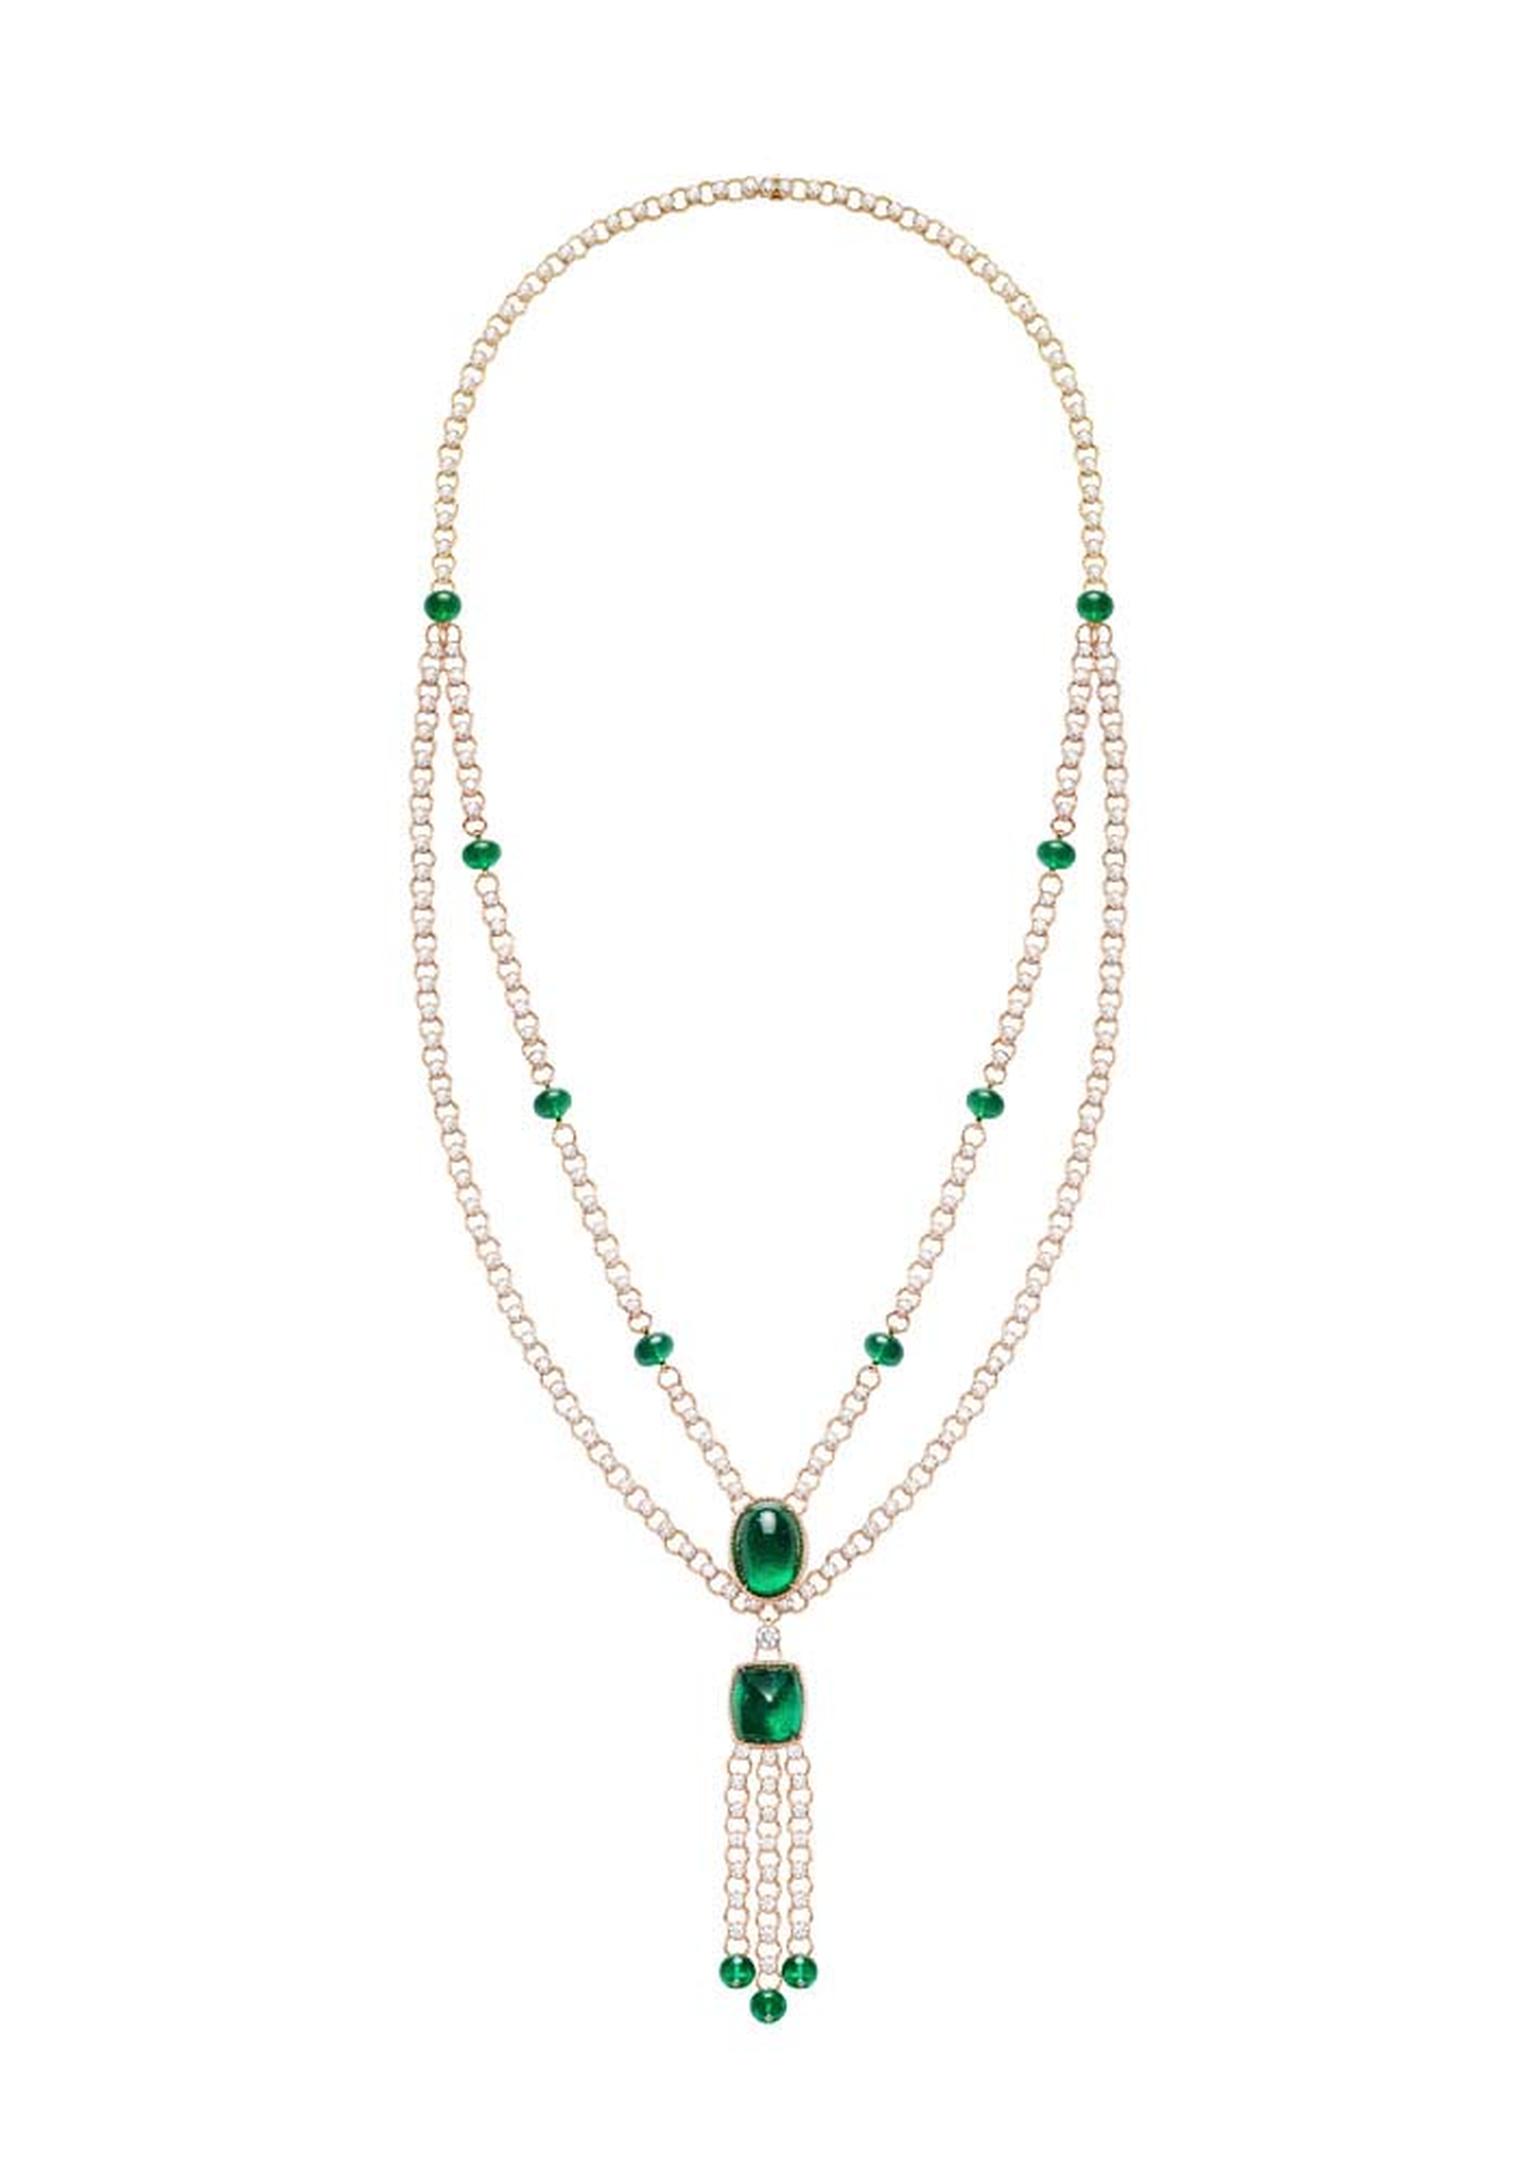 Extremely Piaget collection necklace in pink gold set with 48.54ct emerald beads, 29.57ct brilliant-cut diamonds, a 25.38ct oval cabochon-cut emerald and a 20.27ct sugarloaf emerald.